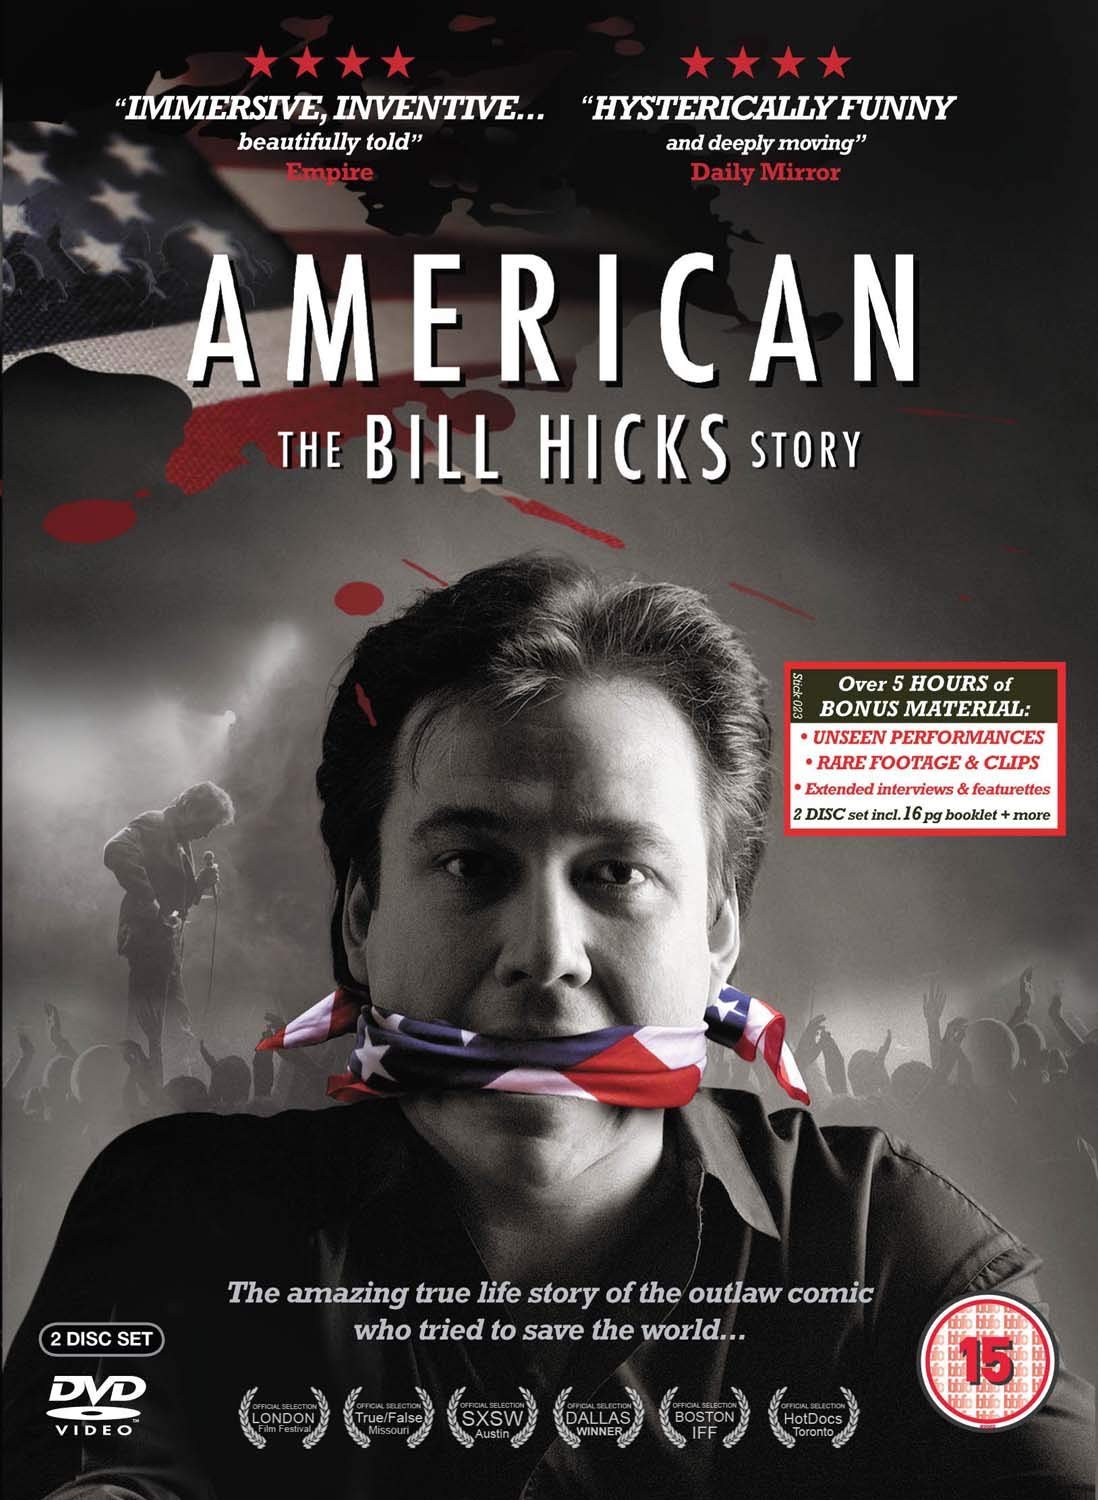 American – The Bill Hicks Story (2009): Feature Documentary